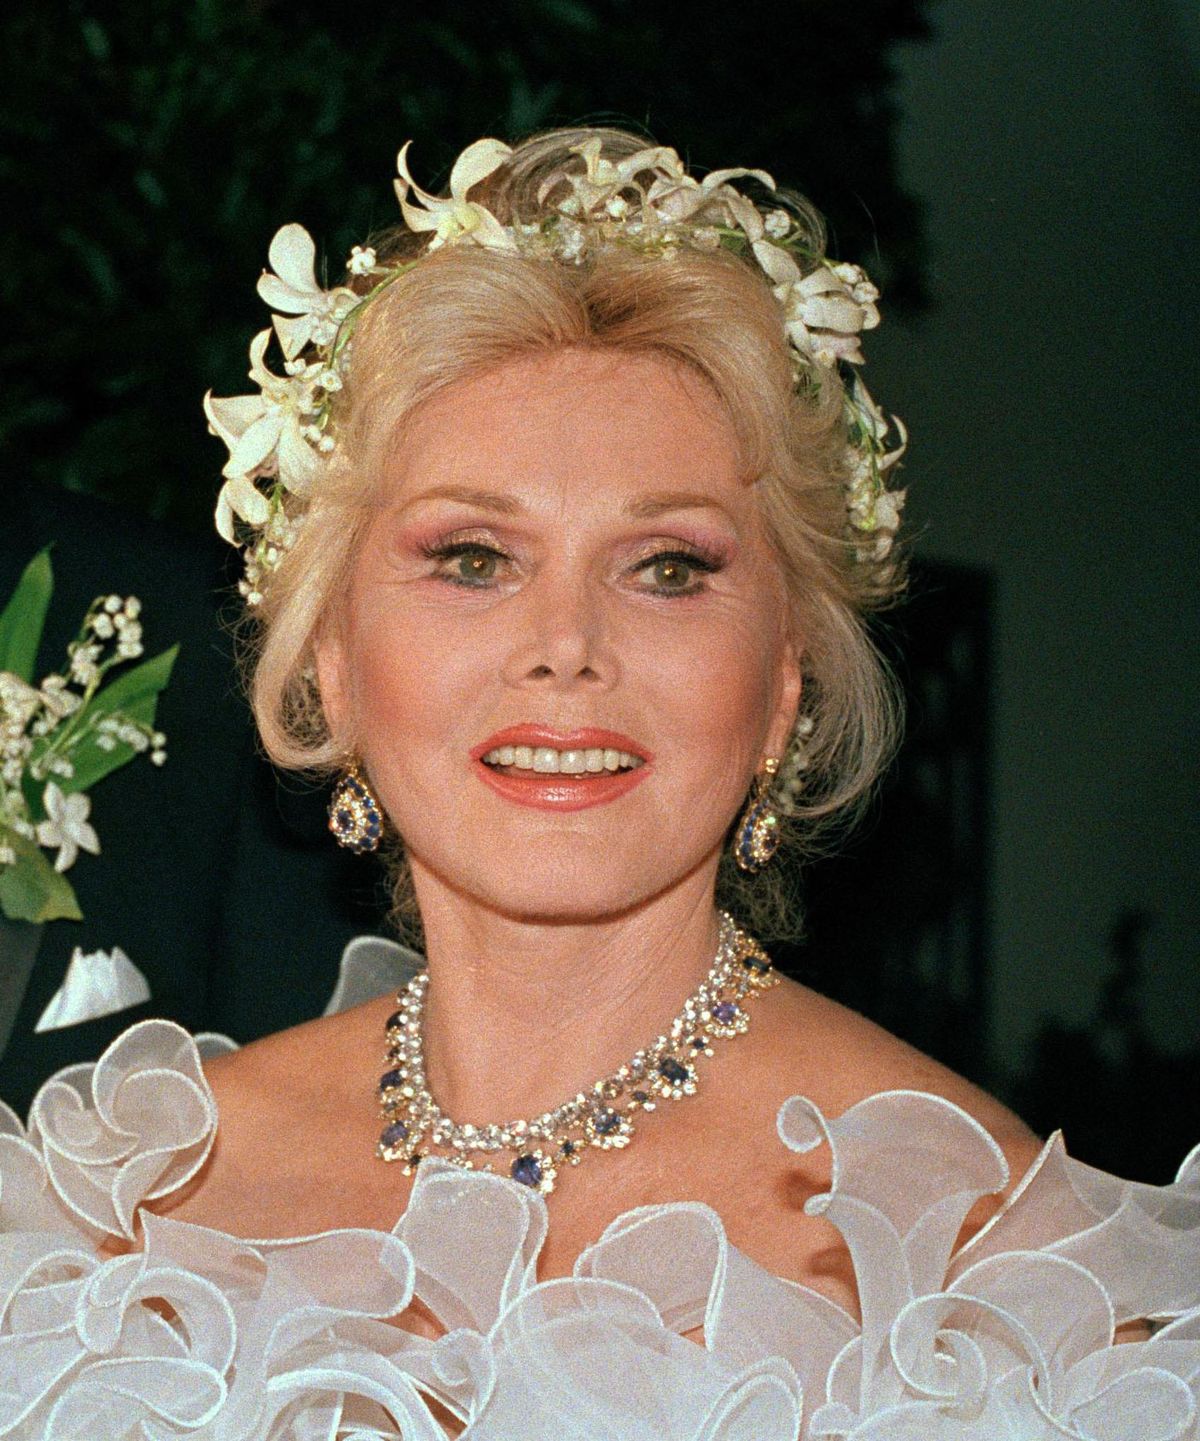 In this Aug. 15, 1986  photo, actress Zsa Zsa Gabor smiles in Los Angeles. Gabor was remembered at a funeral Mass Friday, Dec. 30, 2016, at a picturesque Beverly Hills church not only for her fame, but also what a pastor called her lesser-known compassionate side. The Hungarian-American actress died Dec. 18, 2016, from a heart attack at age 99. (Associated Press)